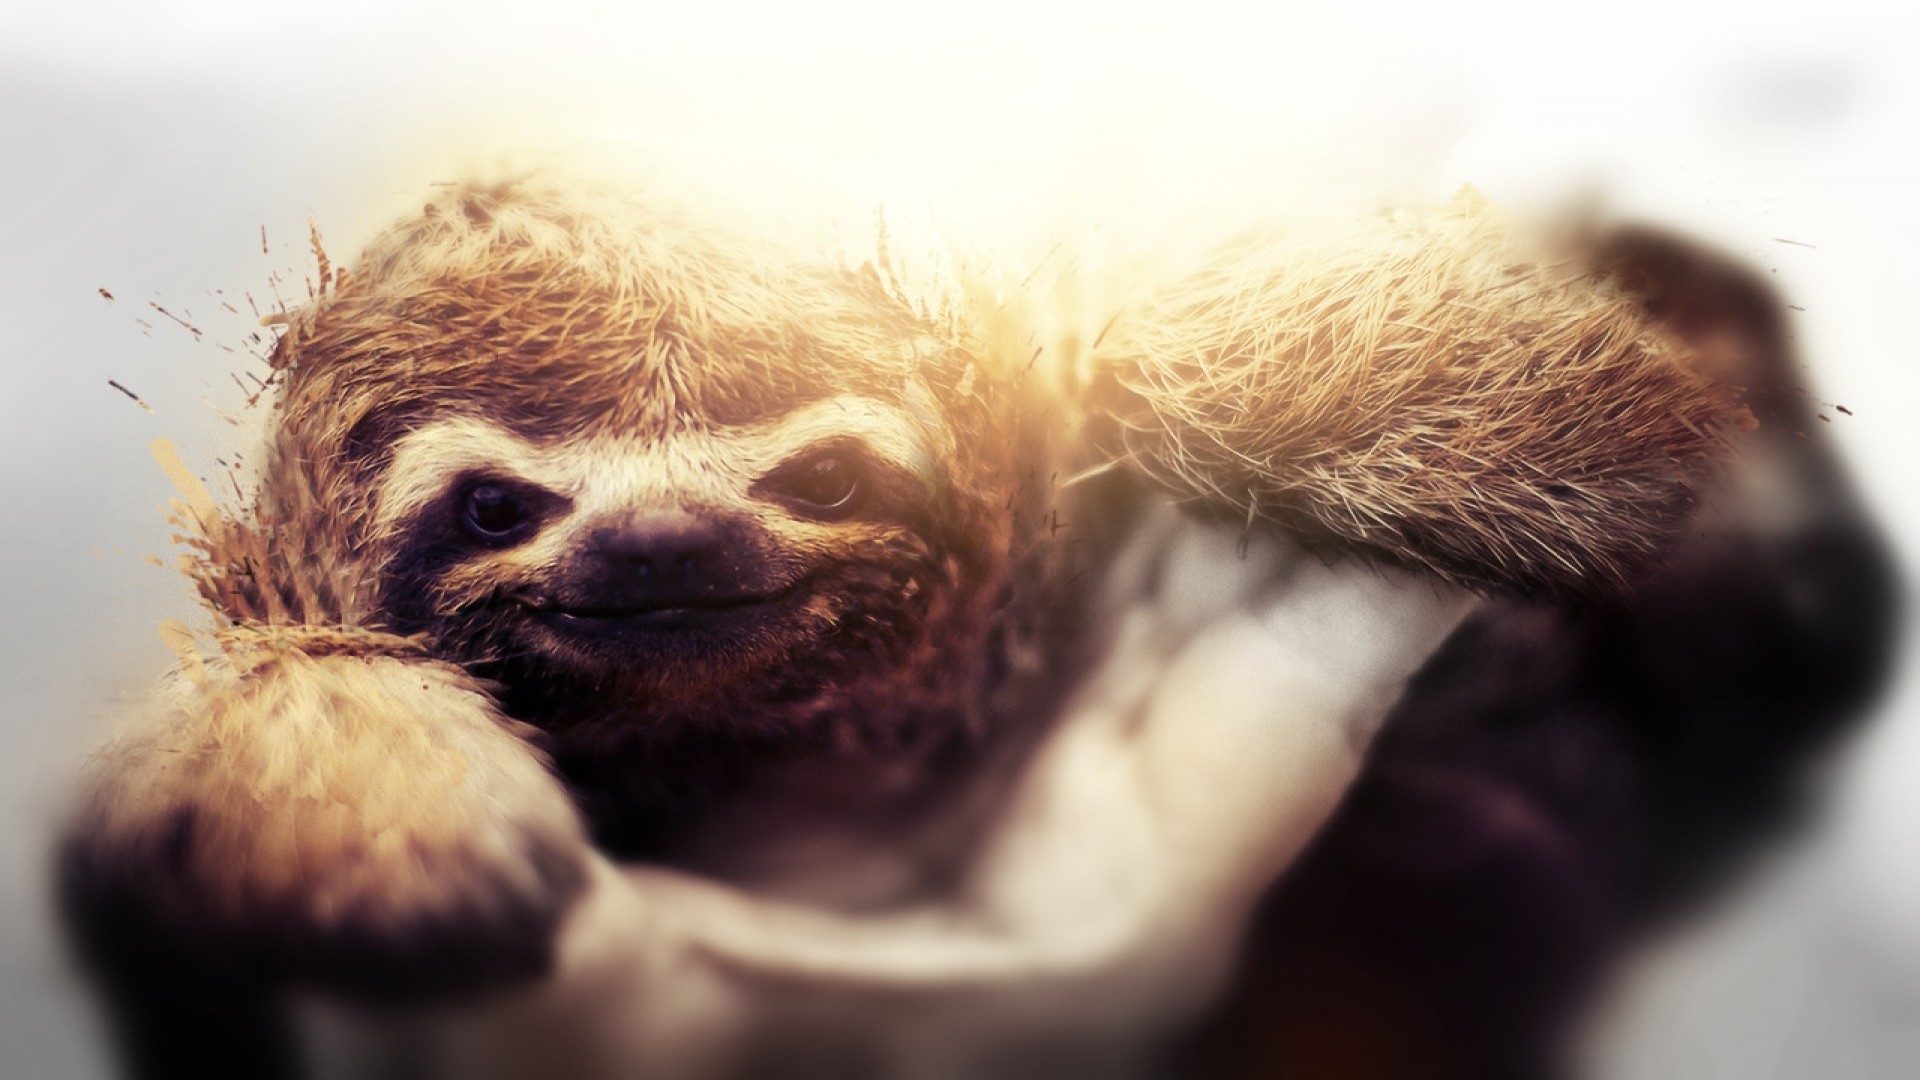 sloth iphone wallpaper,three toed sloth,sloth,two toed sloth,snout,nose